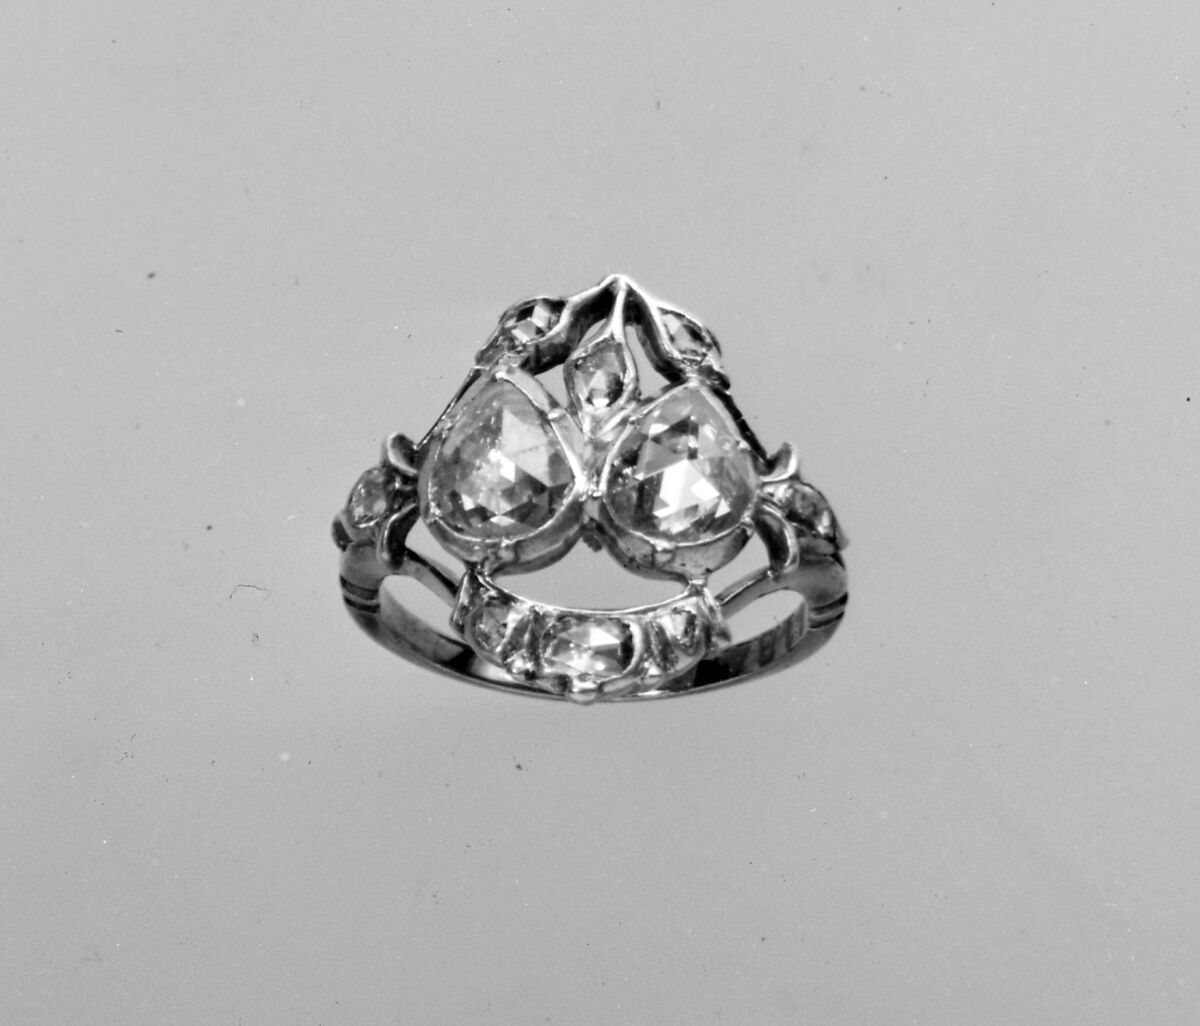 Ring, Gold, silver, diamonds, probably French 